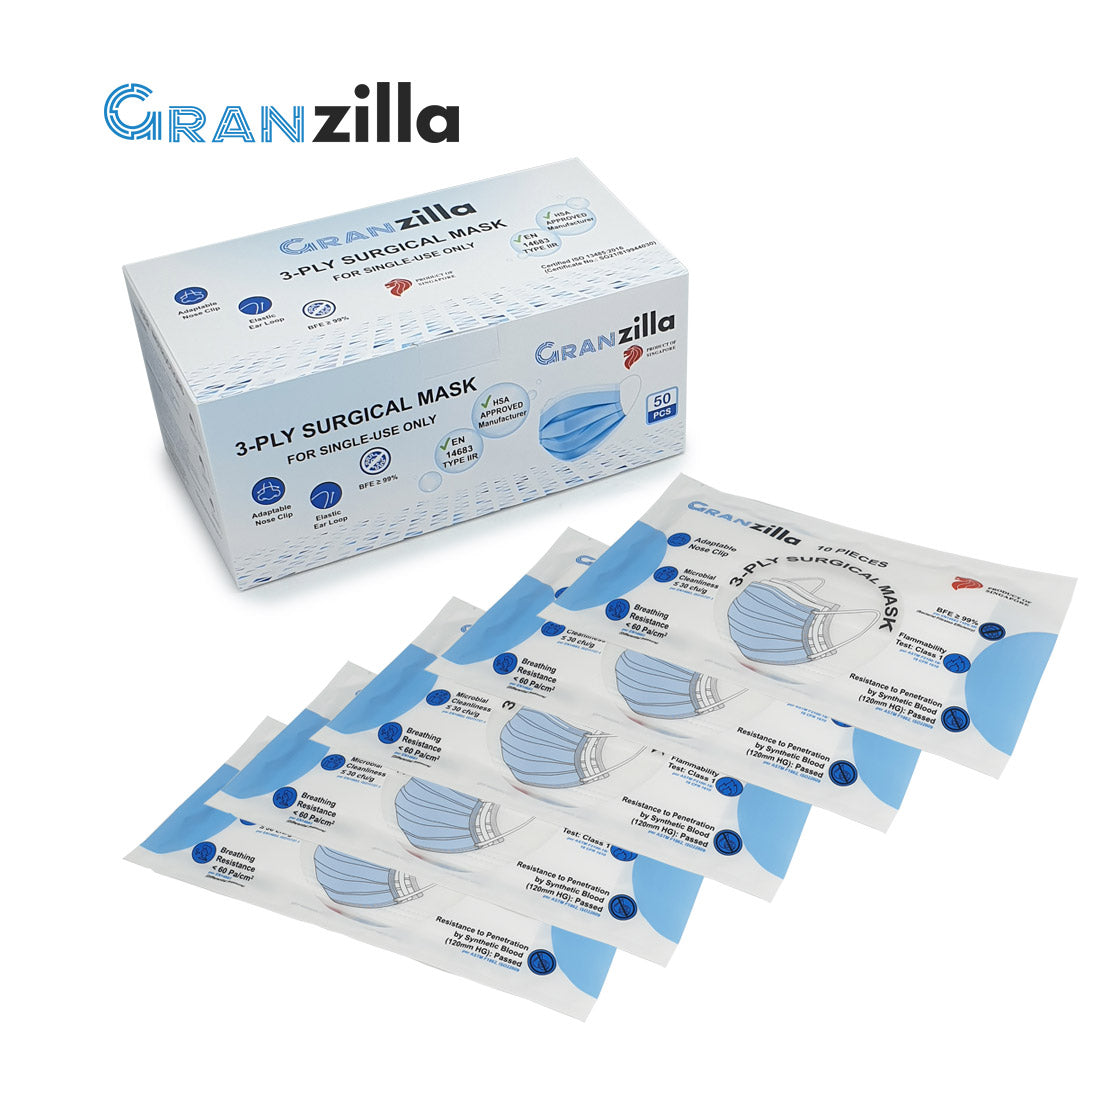 Box of granzilla face mask and individual vacuum sealed packs found within it